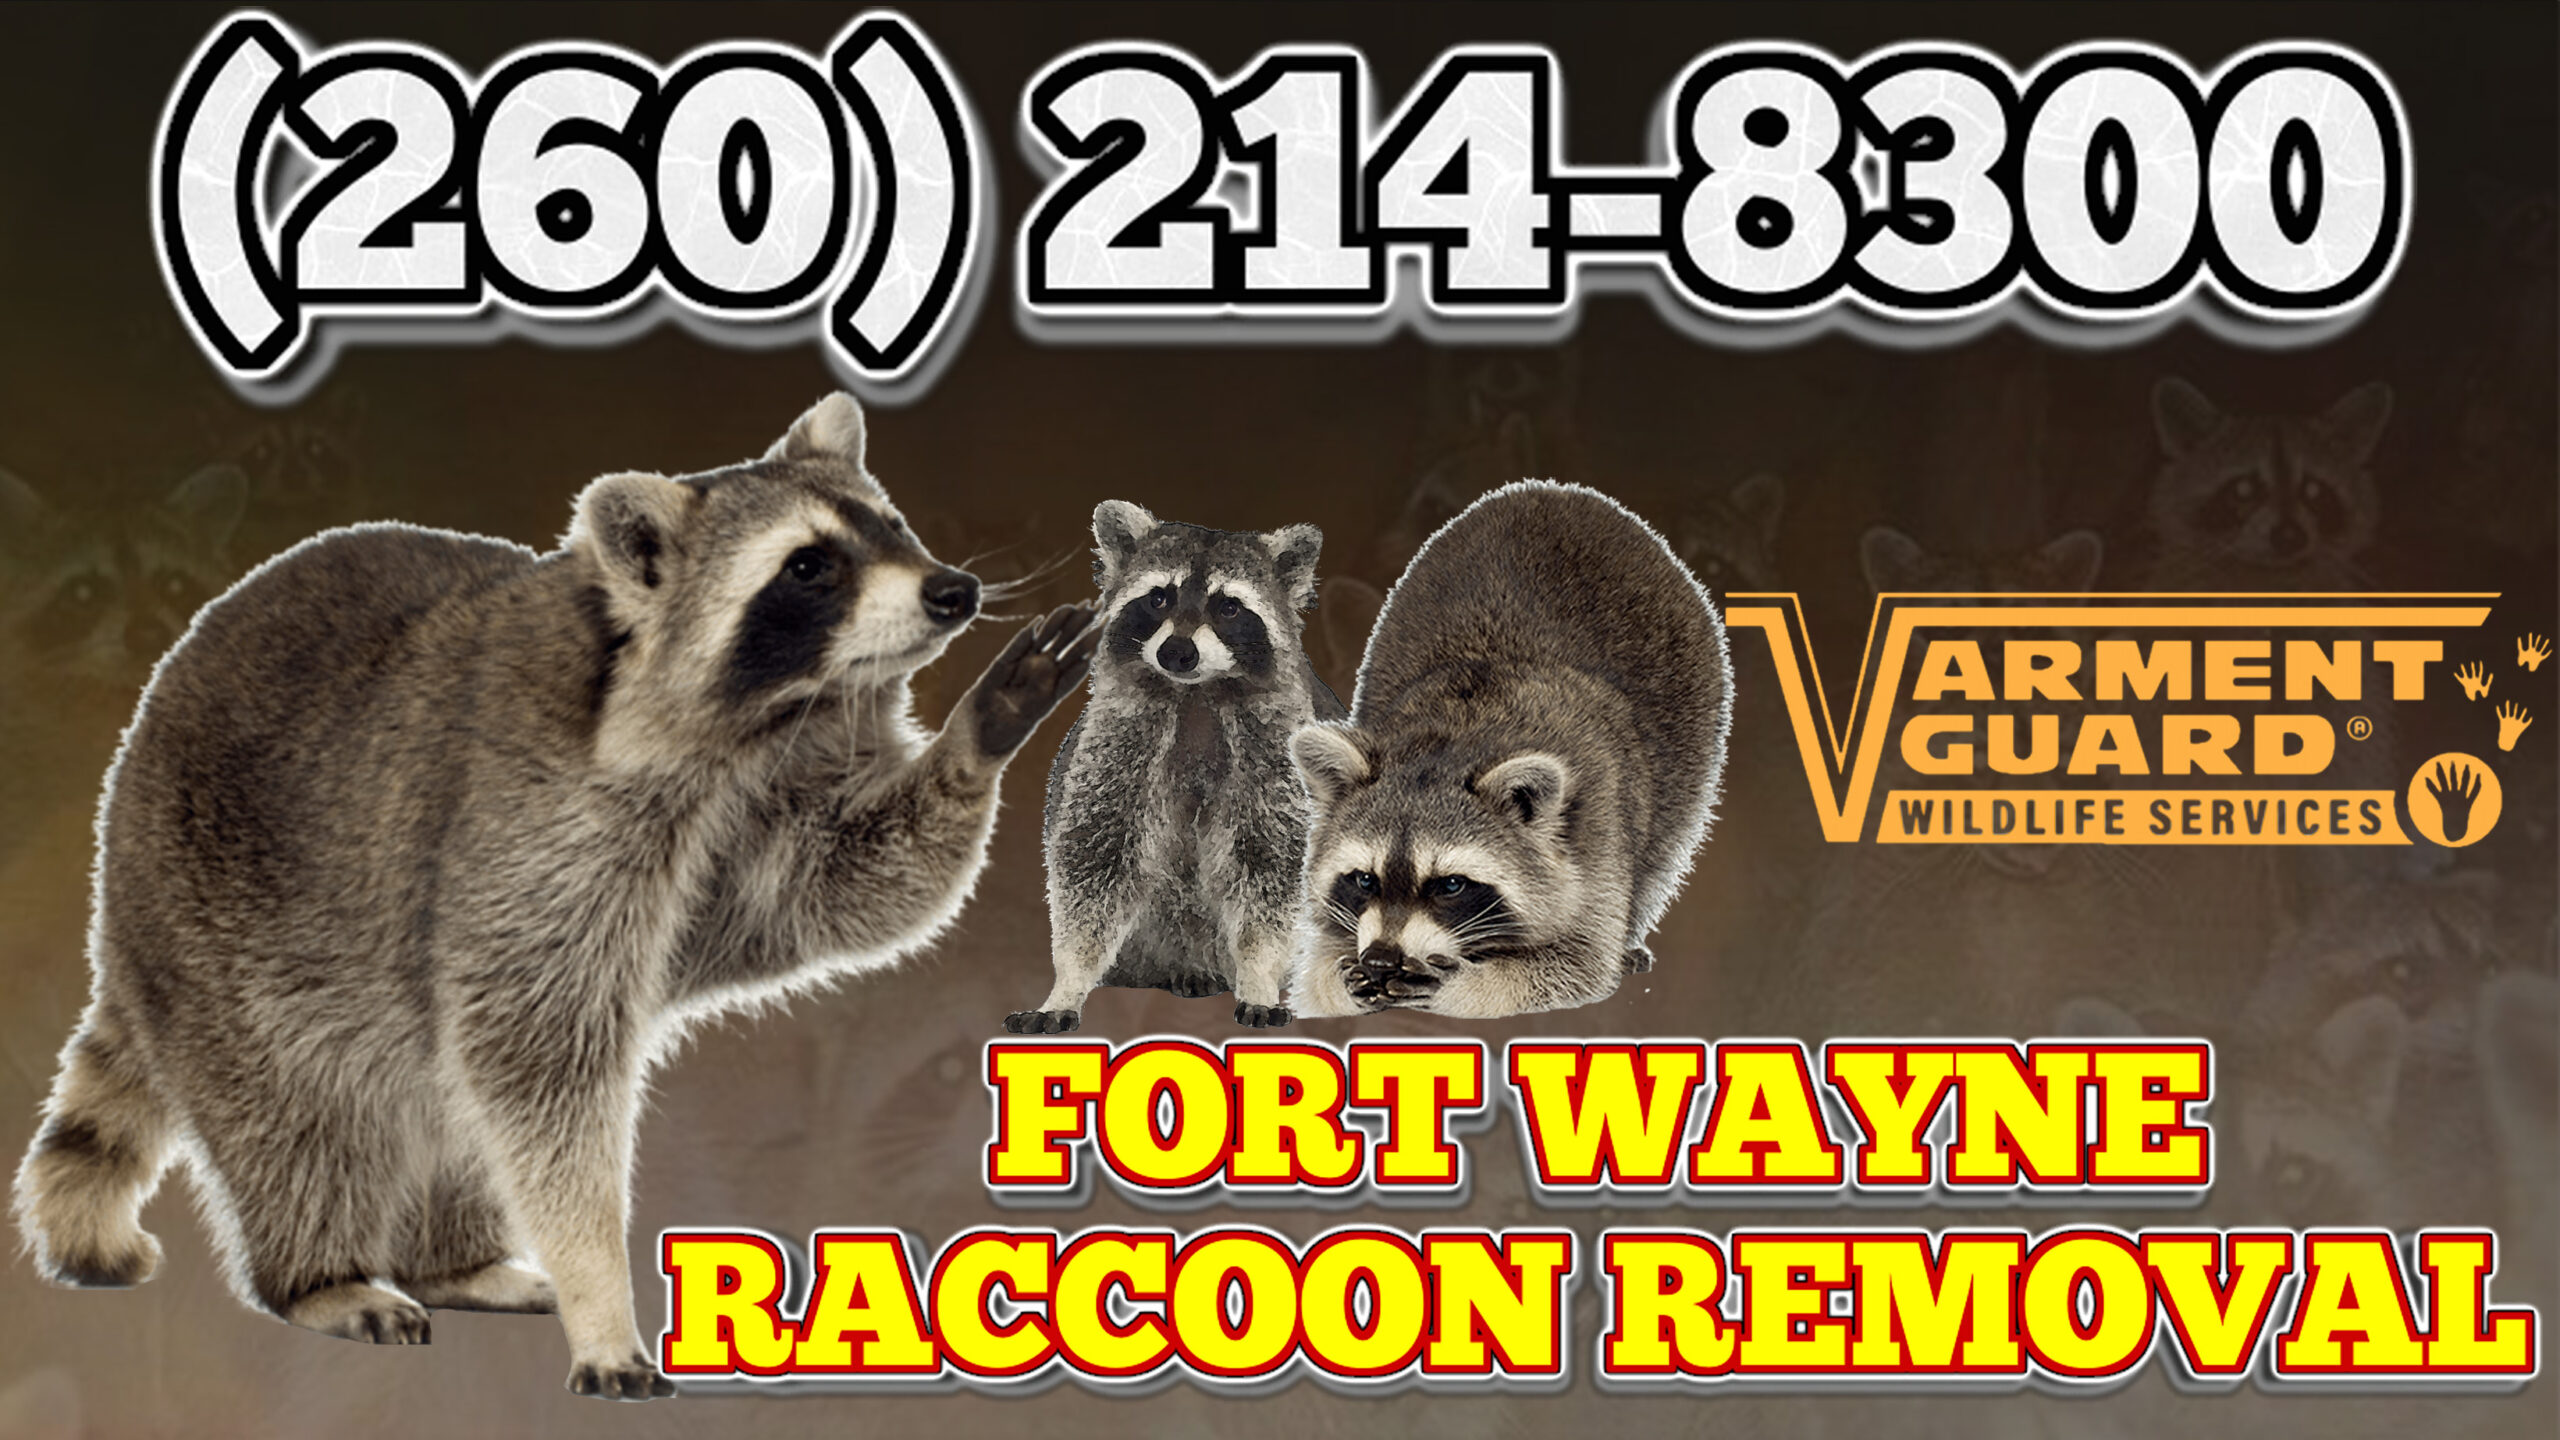 Monroeville raccoon removal near me